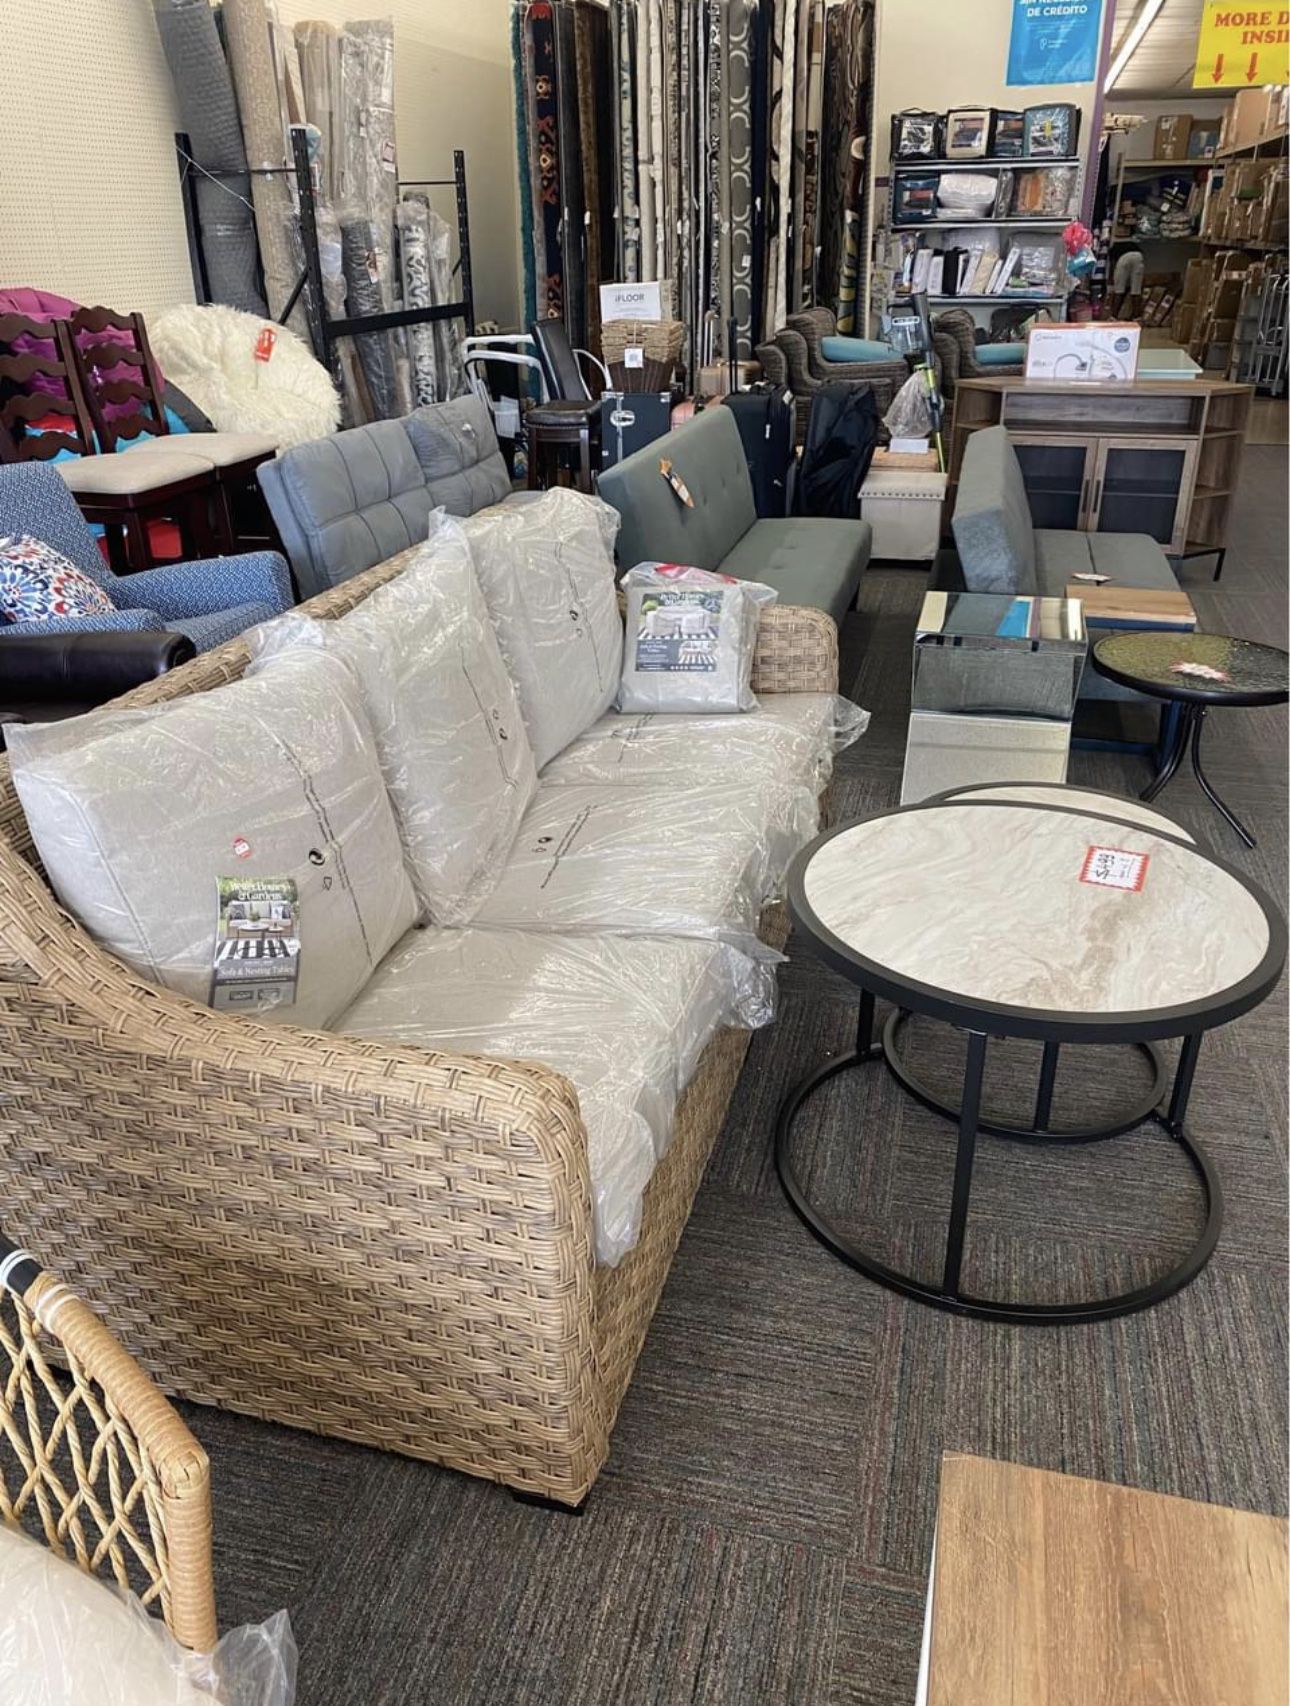 Better Homes & Gardens 3 Piece Sofa & Nesting Table Set With Patio Cover  For Sale In Norfolk, Va – Offerup Pertaining To 3 Piece Sofa & Nesting Table Set (Photo 9 of 15)